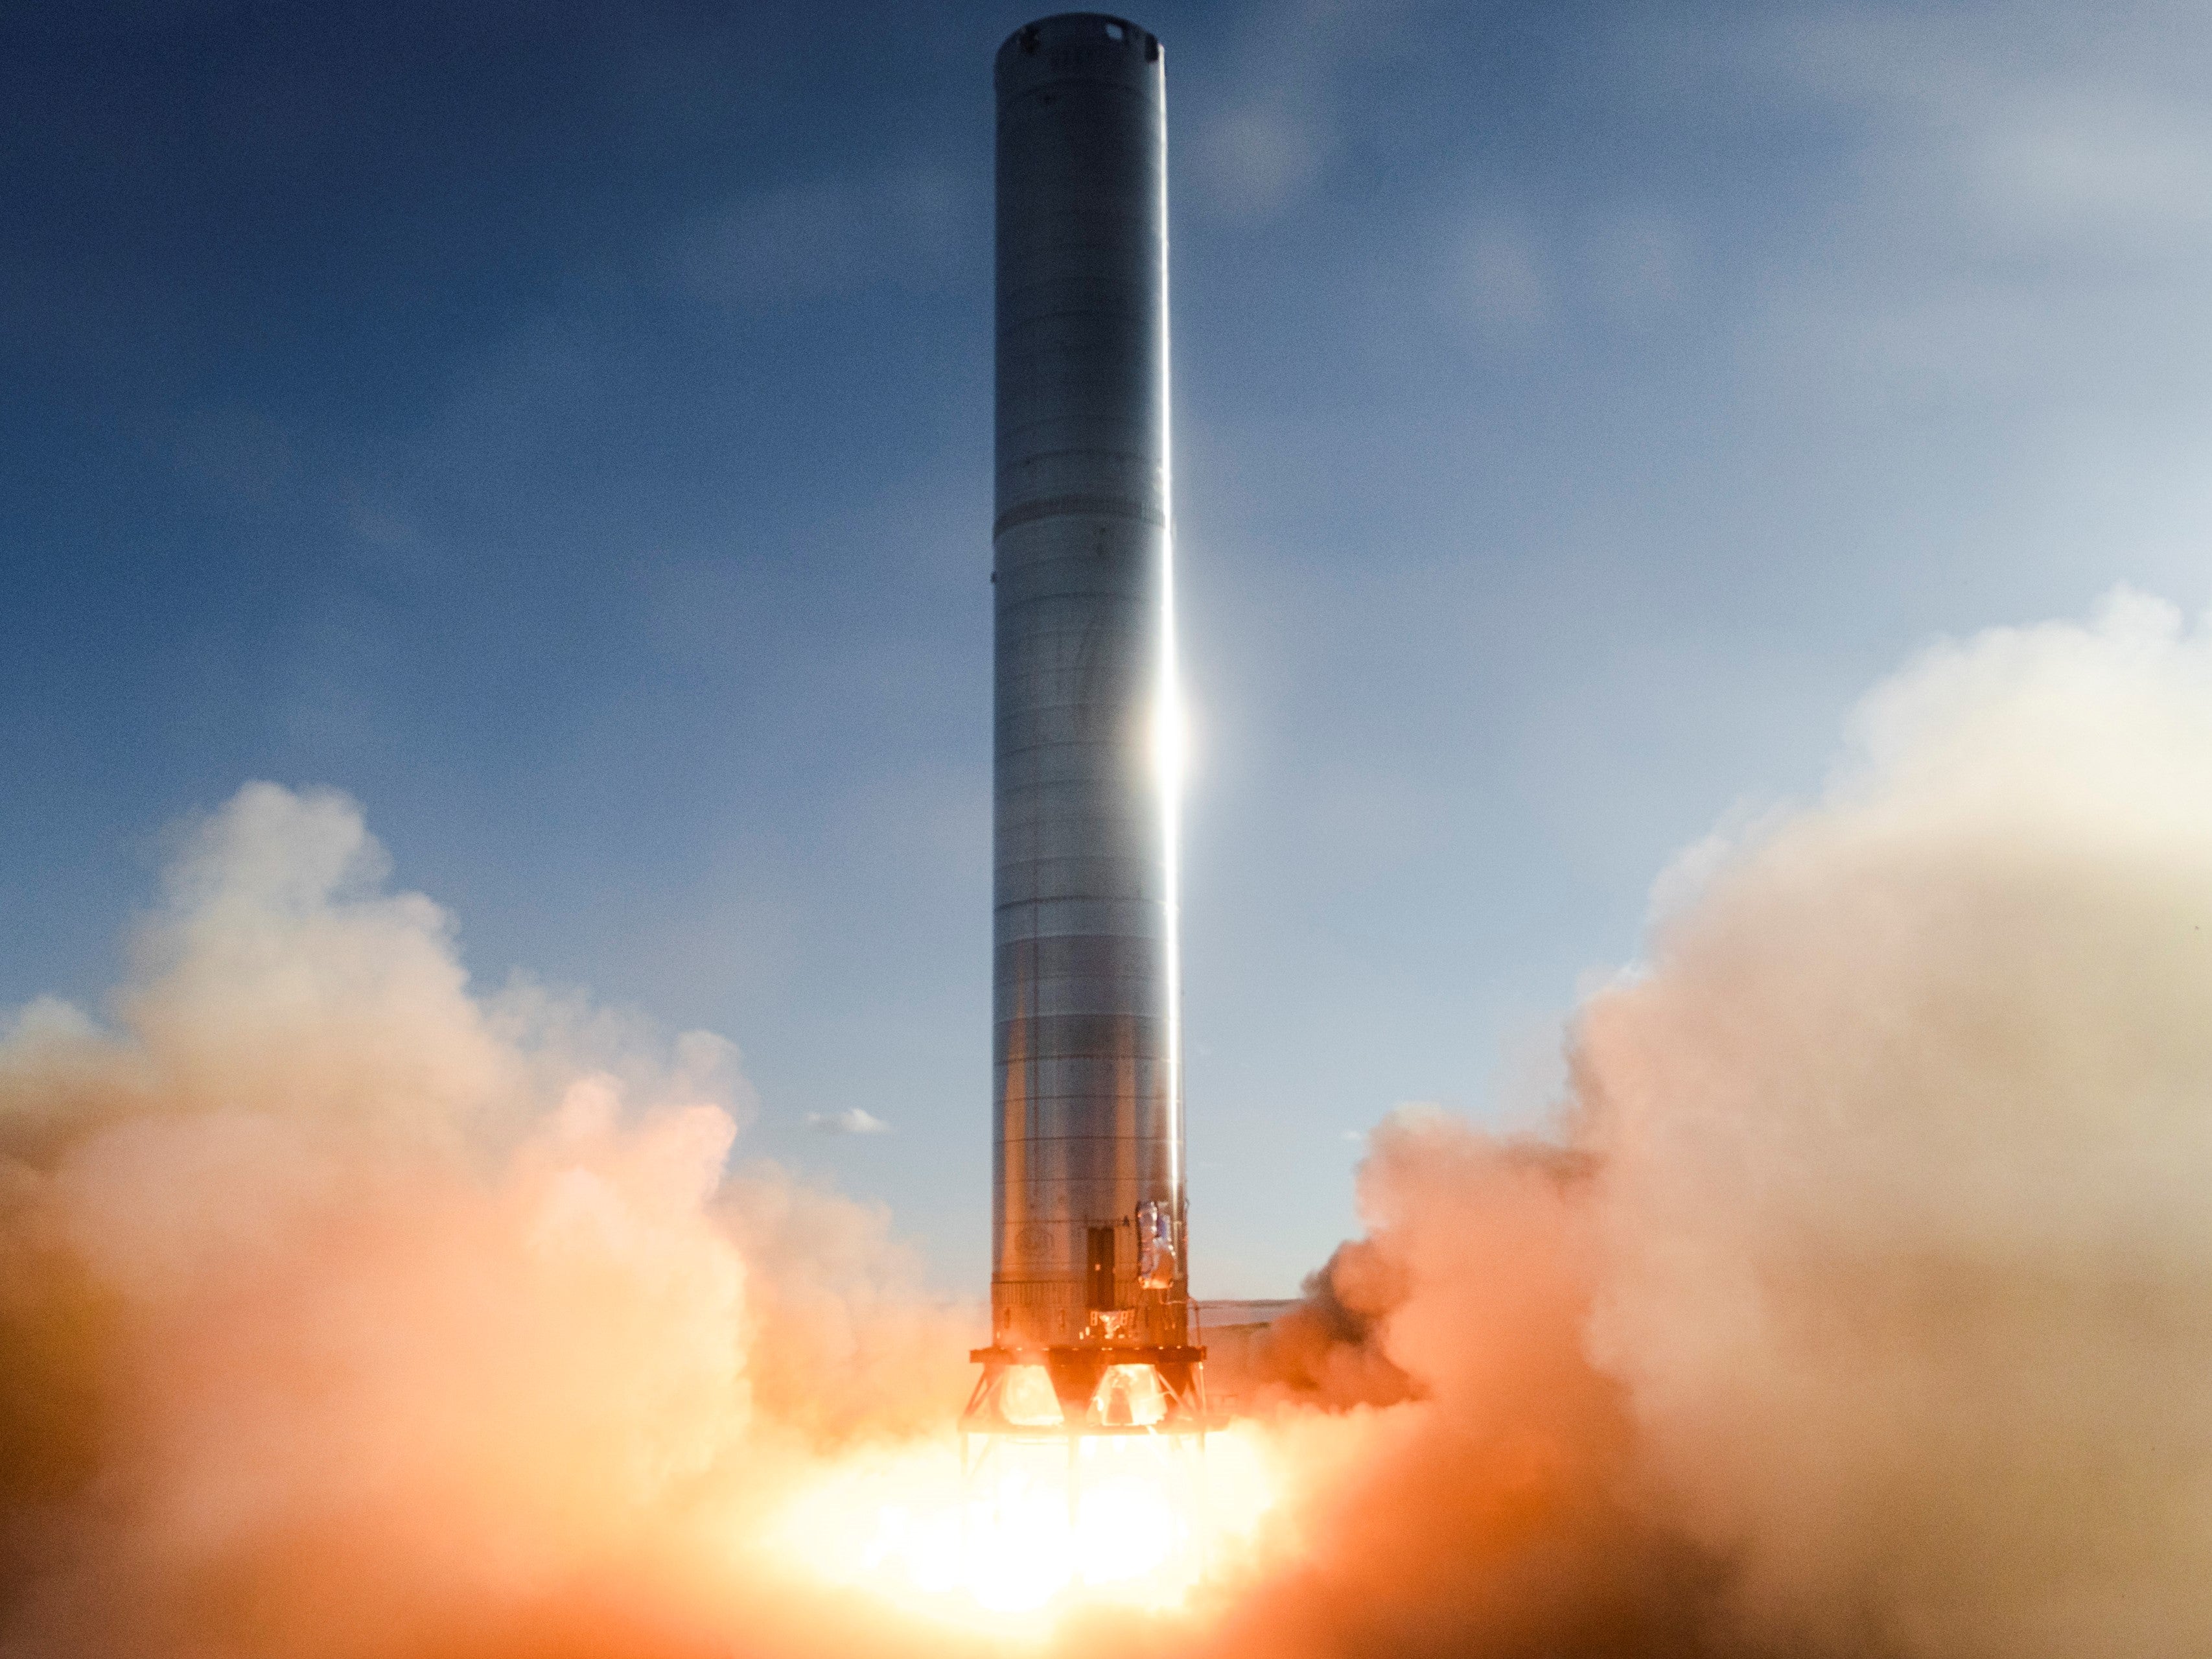 The first static fire test of SpaceX’s Super Heavy Booster rocket took place on 19 July, 2021, in Boca Chica, Texas